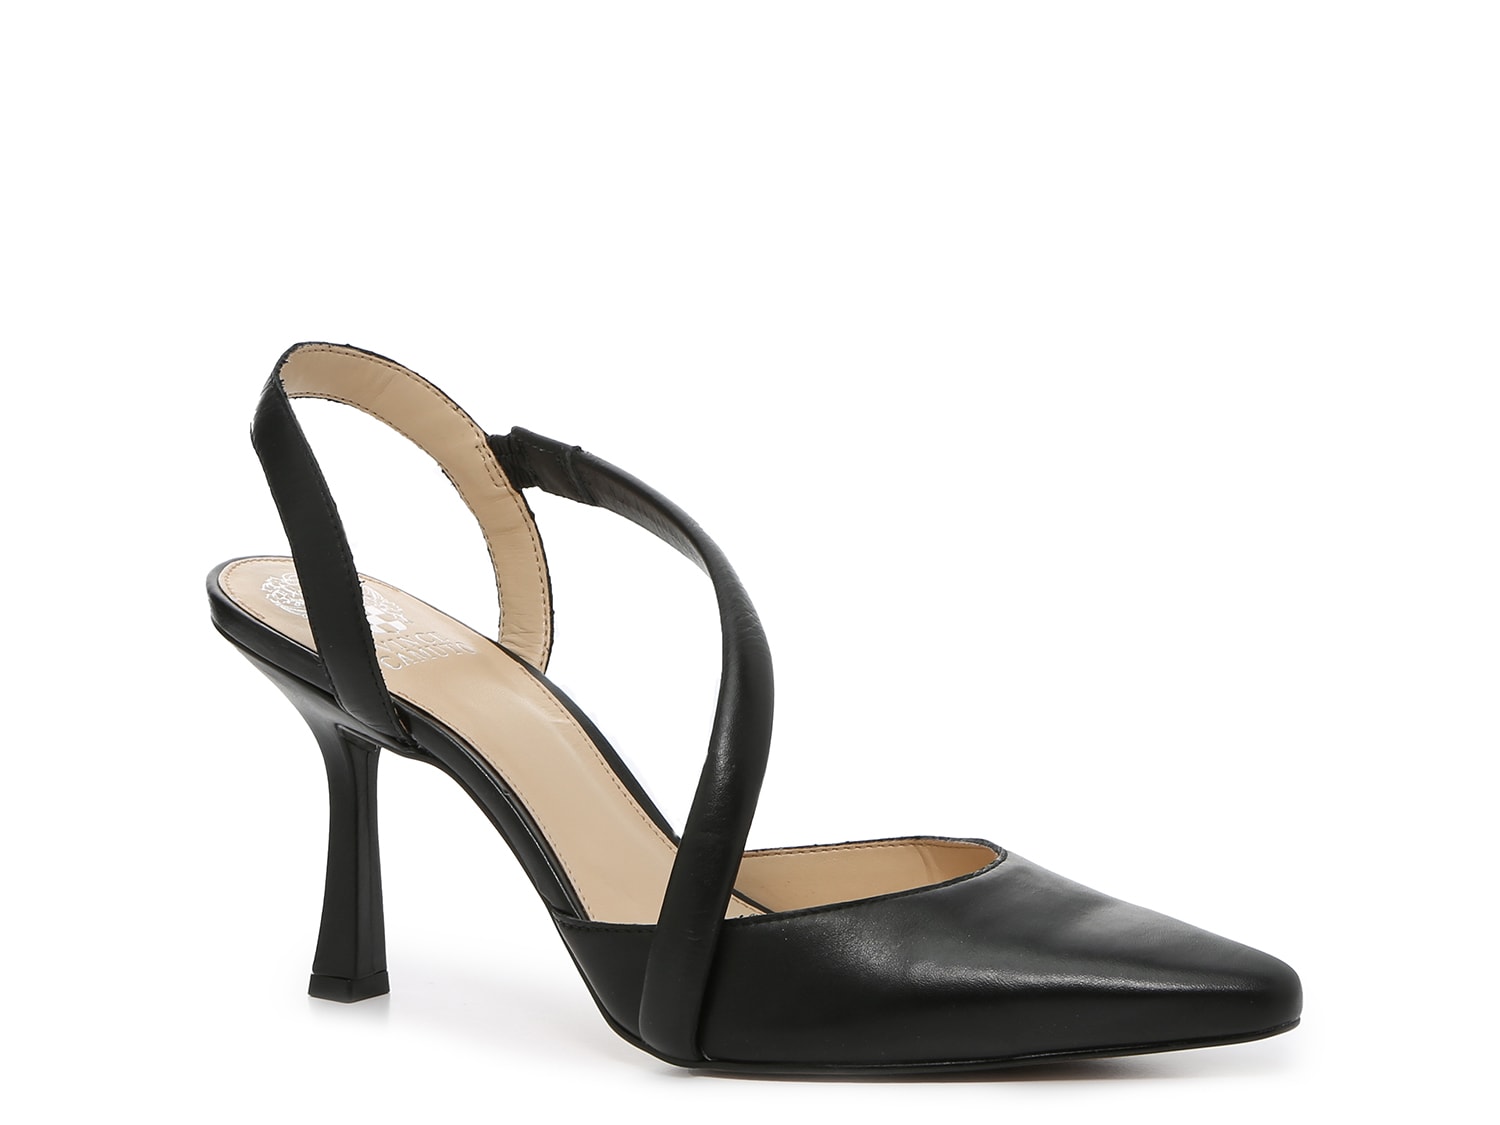 Vince Camuto Kentrena Pump - Free Shipping | DSW